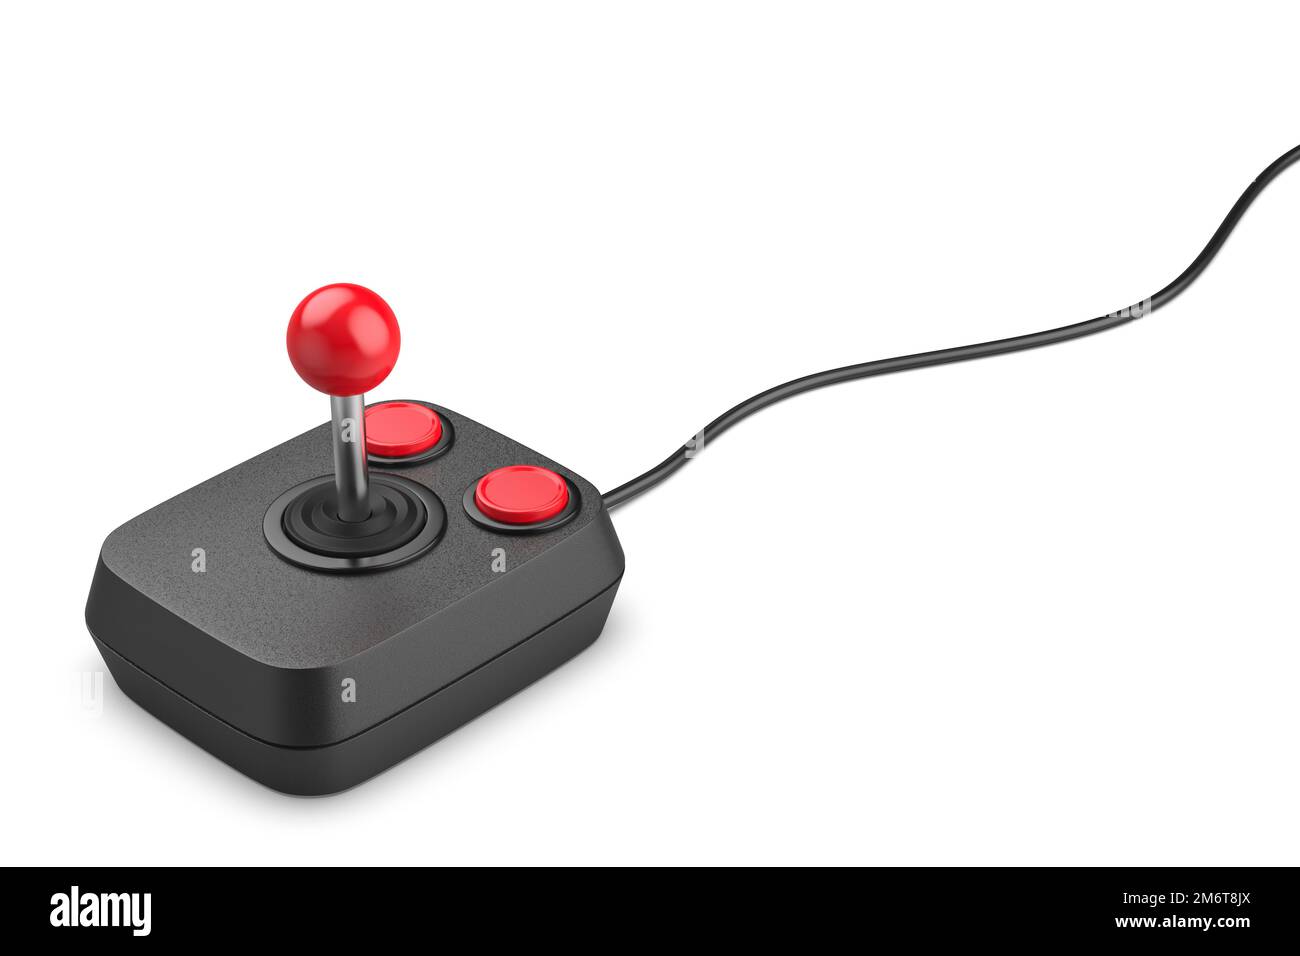 Retro computer joystick with two buttons on white background Stock Photo